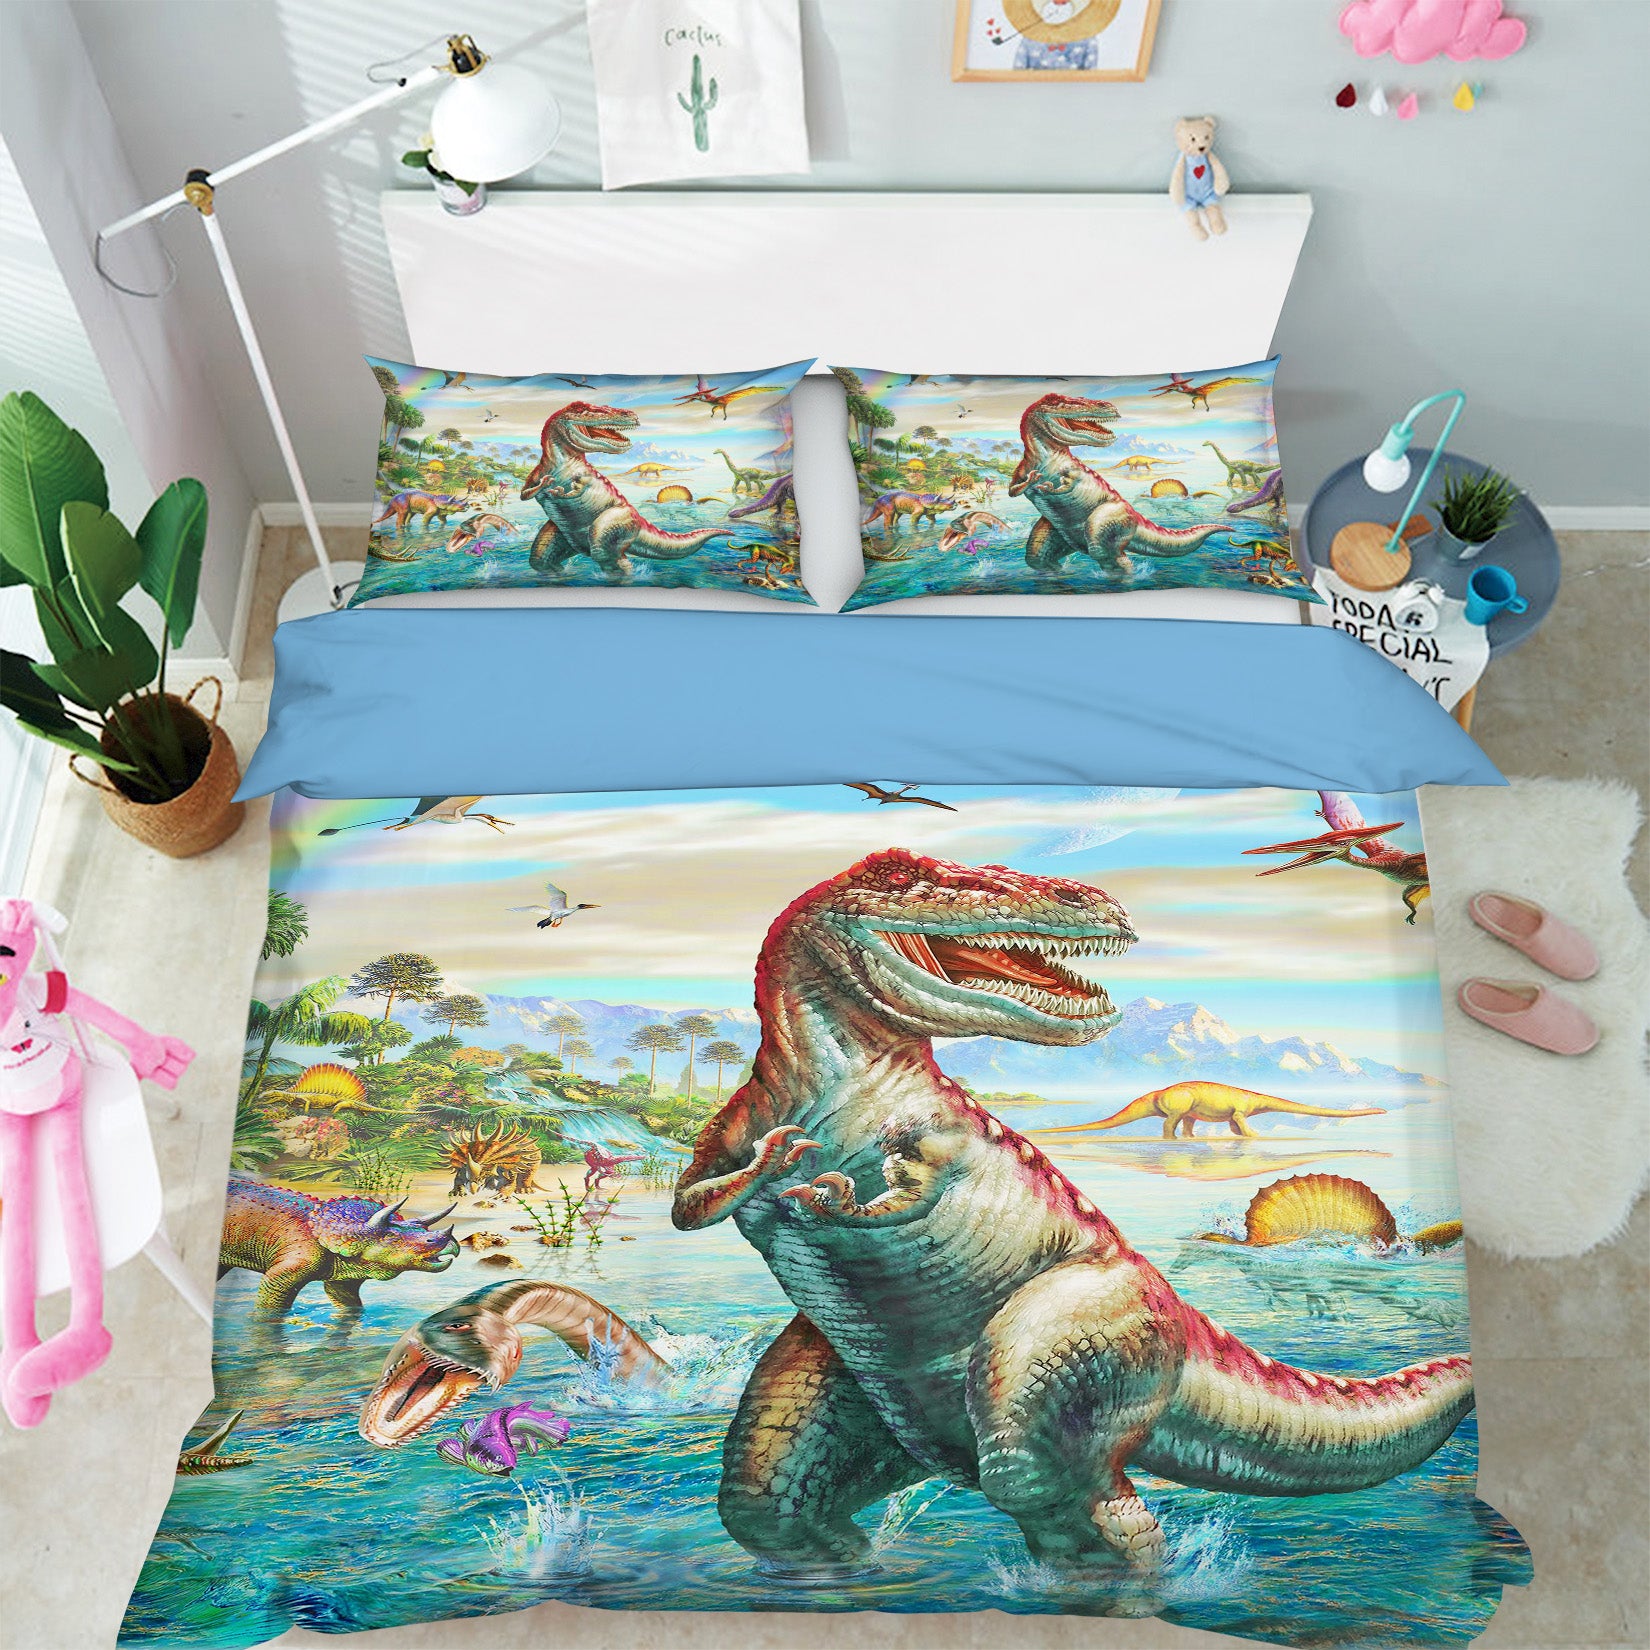 3D Dinosaur Mouth 2042 Adrian Chesterman Bedding Bed Pillowcases Quilt